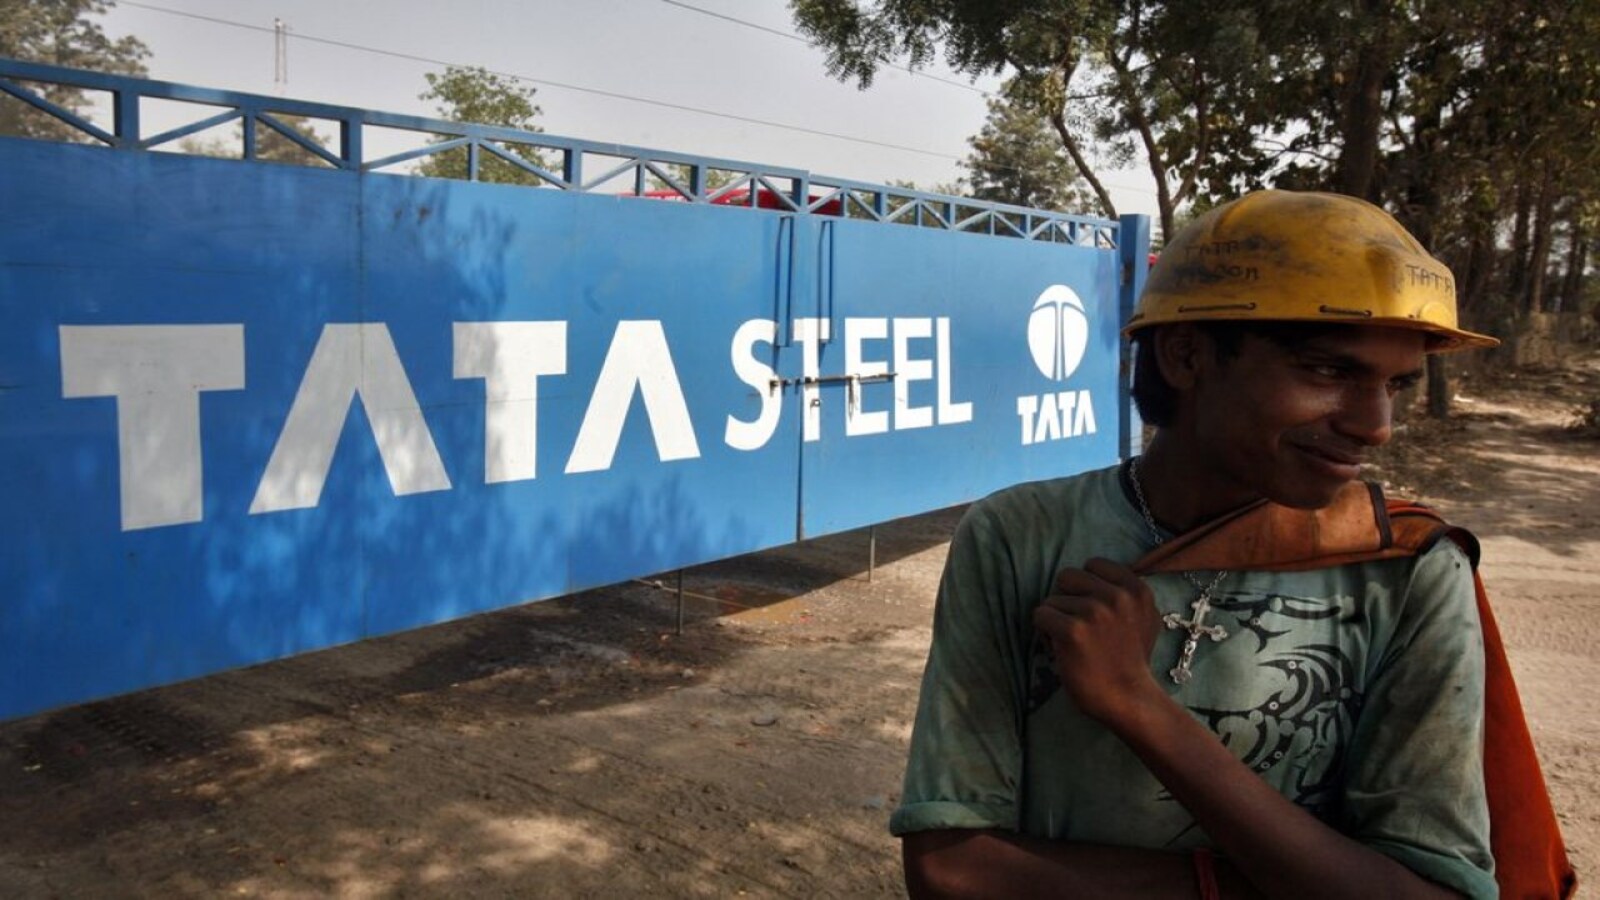 Tata Steel Inks Pact With IOCL To Further Reduce Carbon Footprint